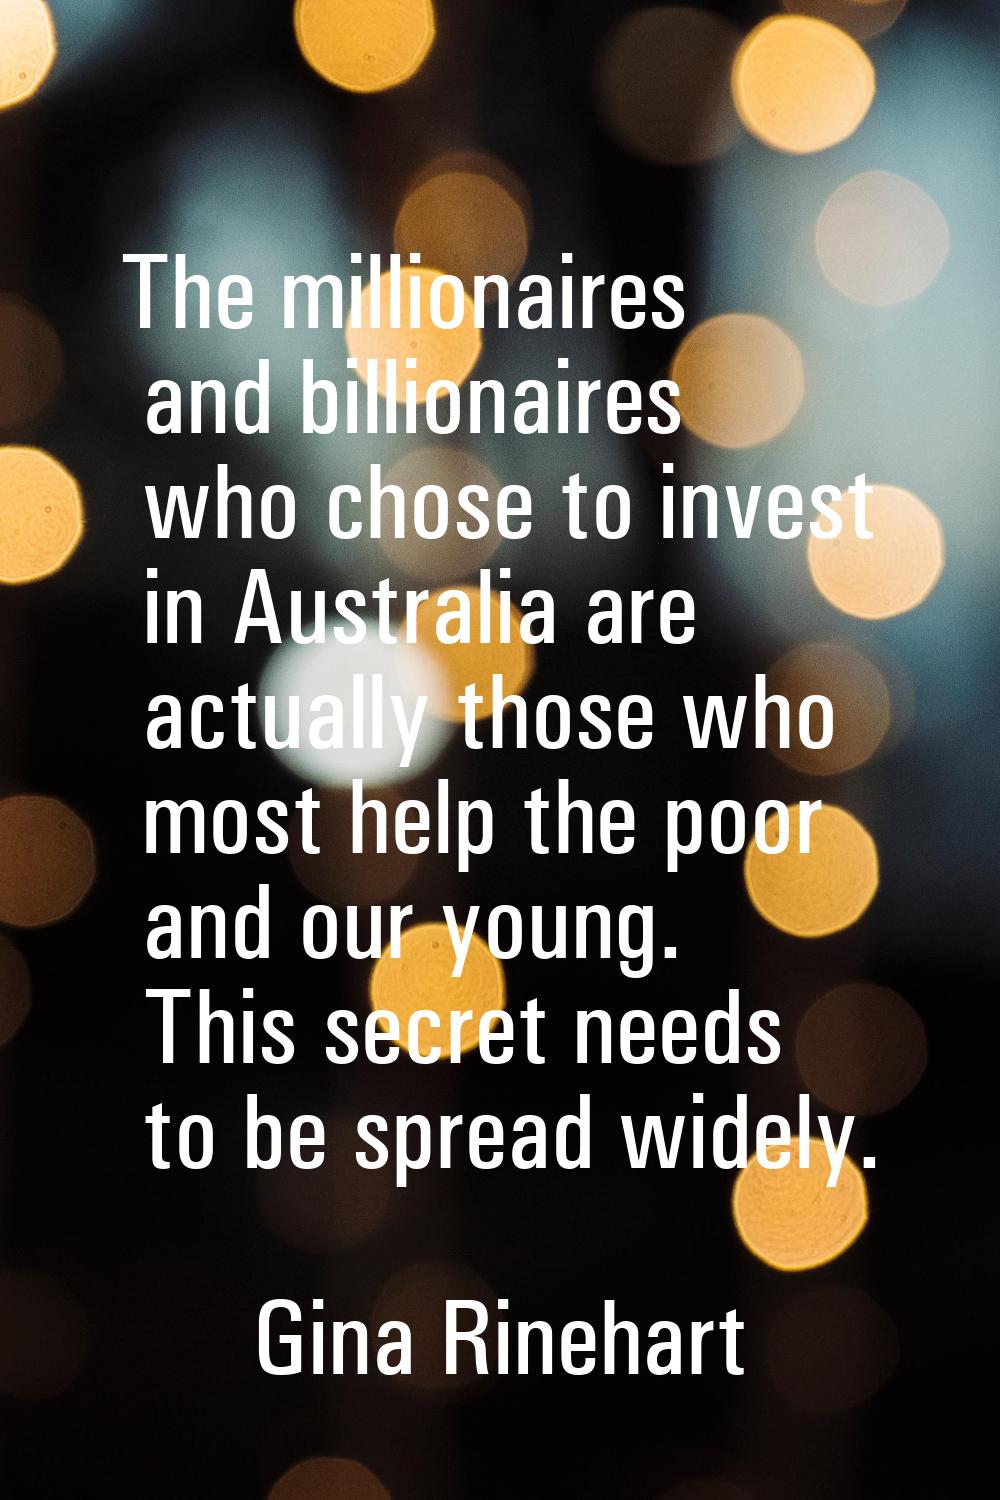 The millionaires and billionaires who chose to invest in Australia are actually those who most help